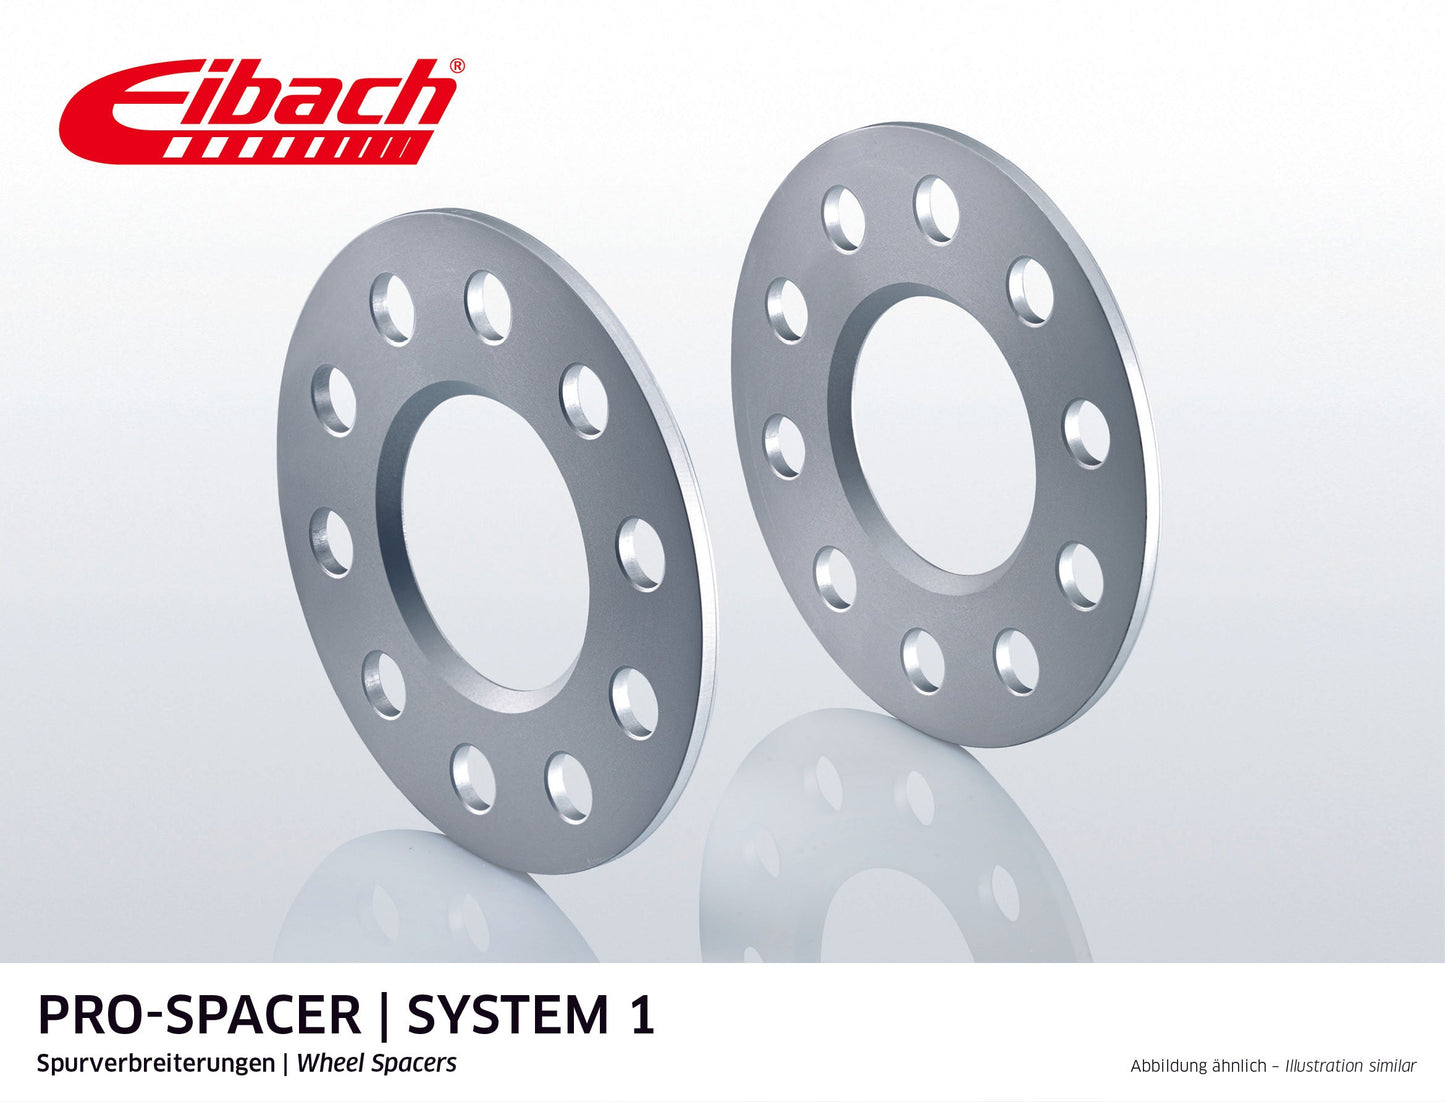 Eibach Pro-Spacer Kit (Pair Of Spacers) 5mm Per Spacer (System 1) S90-1-05-006 (Silver) at £59.42